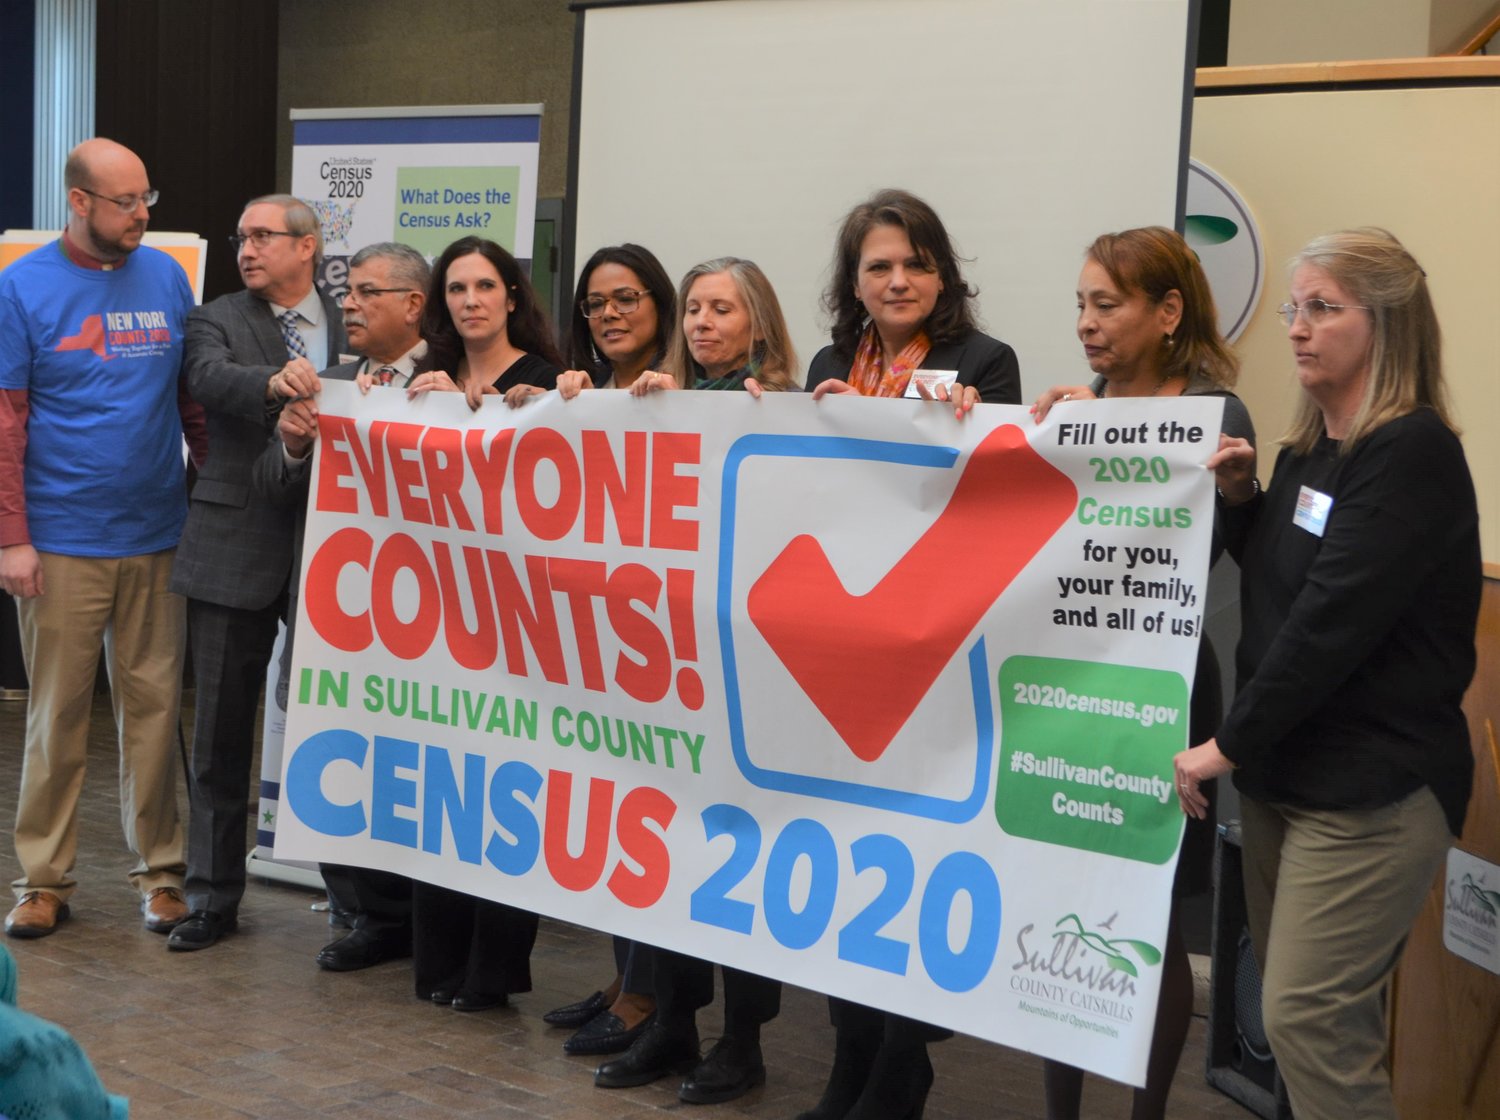 Pictured posing with a new banner related to the census are Dan Hust, Sullivan County communications director, left; Robert Dufour, superintendent of BOCES; Dawn Ciorciari, general manager Bold Gold Media NY; Saraid Gonzalez, Sullivan 180; Sandi Rowland, Sullivan 180; Freda Eisenberg, Sullivan planning commissioner; Mary Berk, U.S. Census; and Mary Paige Lang-Clouse, Ethelbert B. Crawford Library Director.